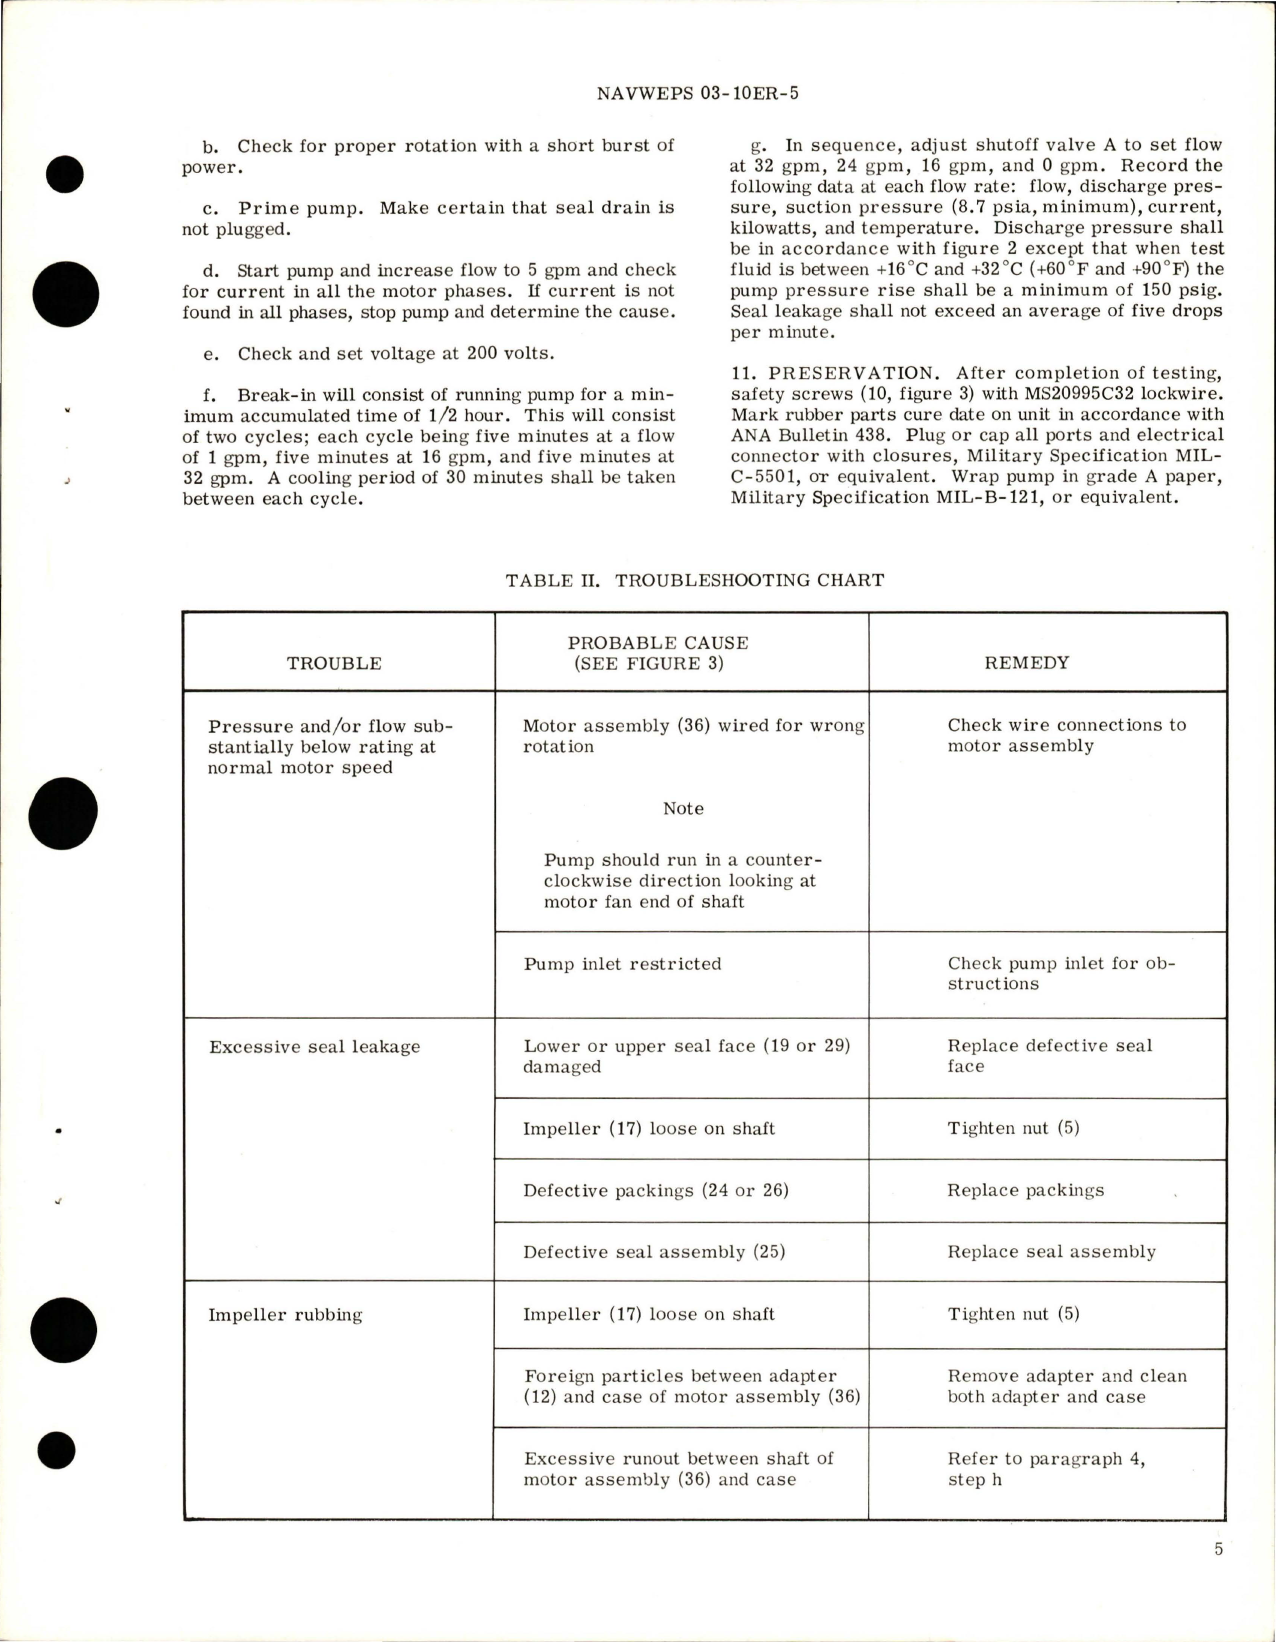 Sample page 5 from AirCorps Library document: Overhaul Instructions with Parts Breakdown for Water Alcohol Injection Pump - Part 6333-3